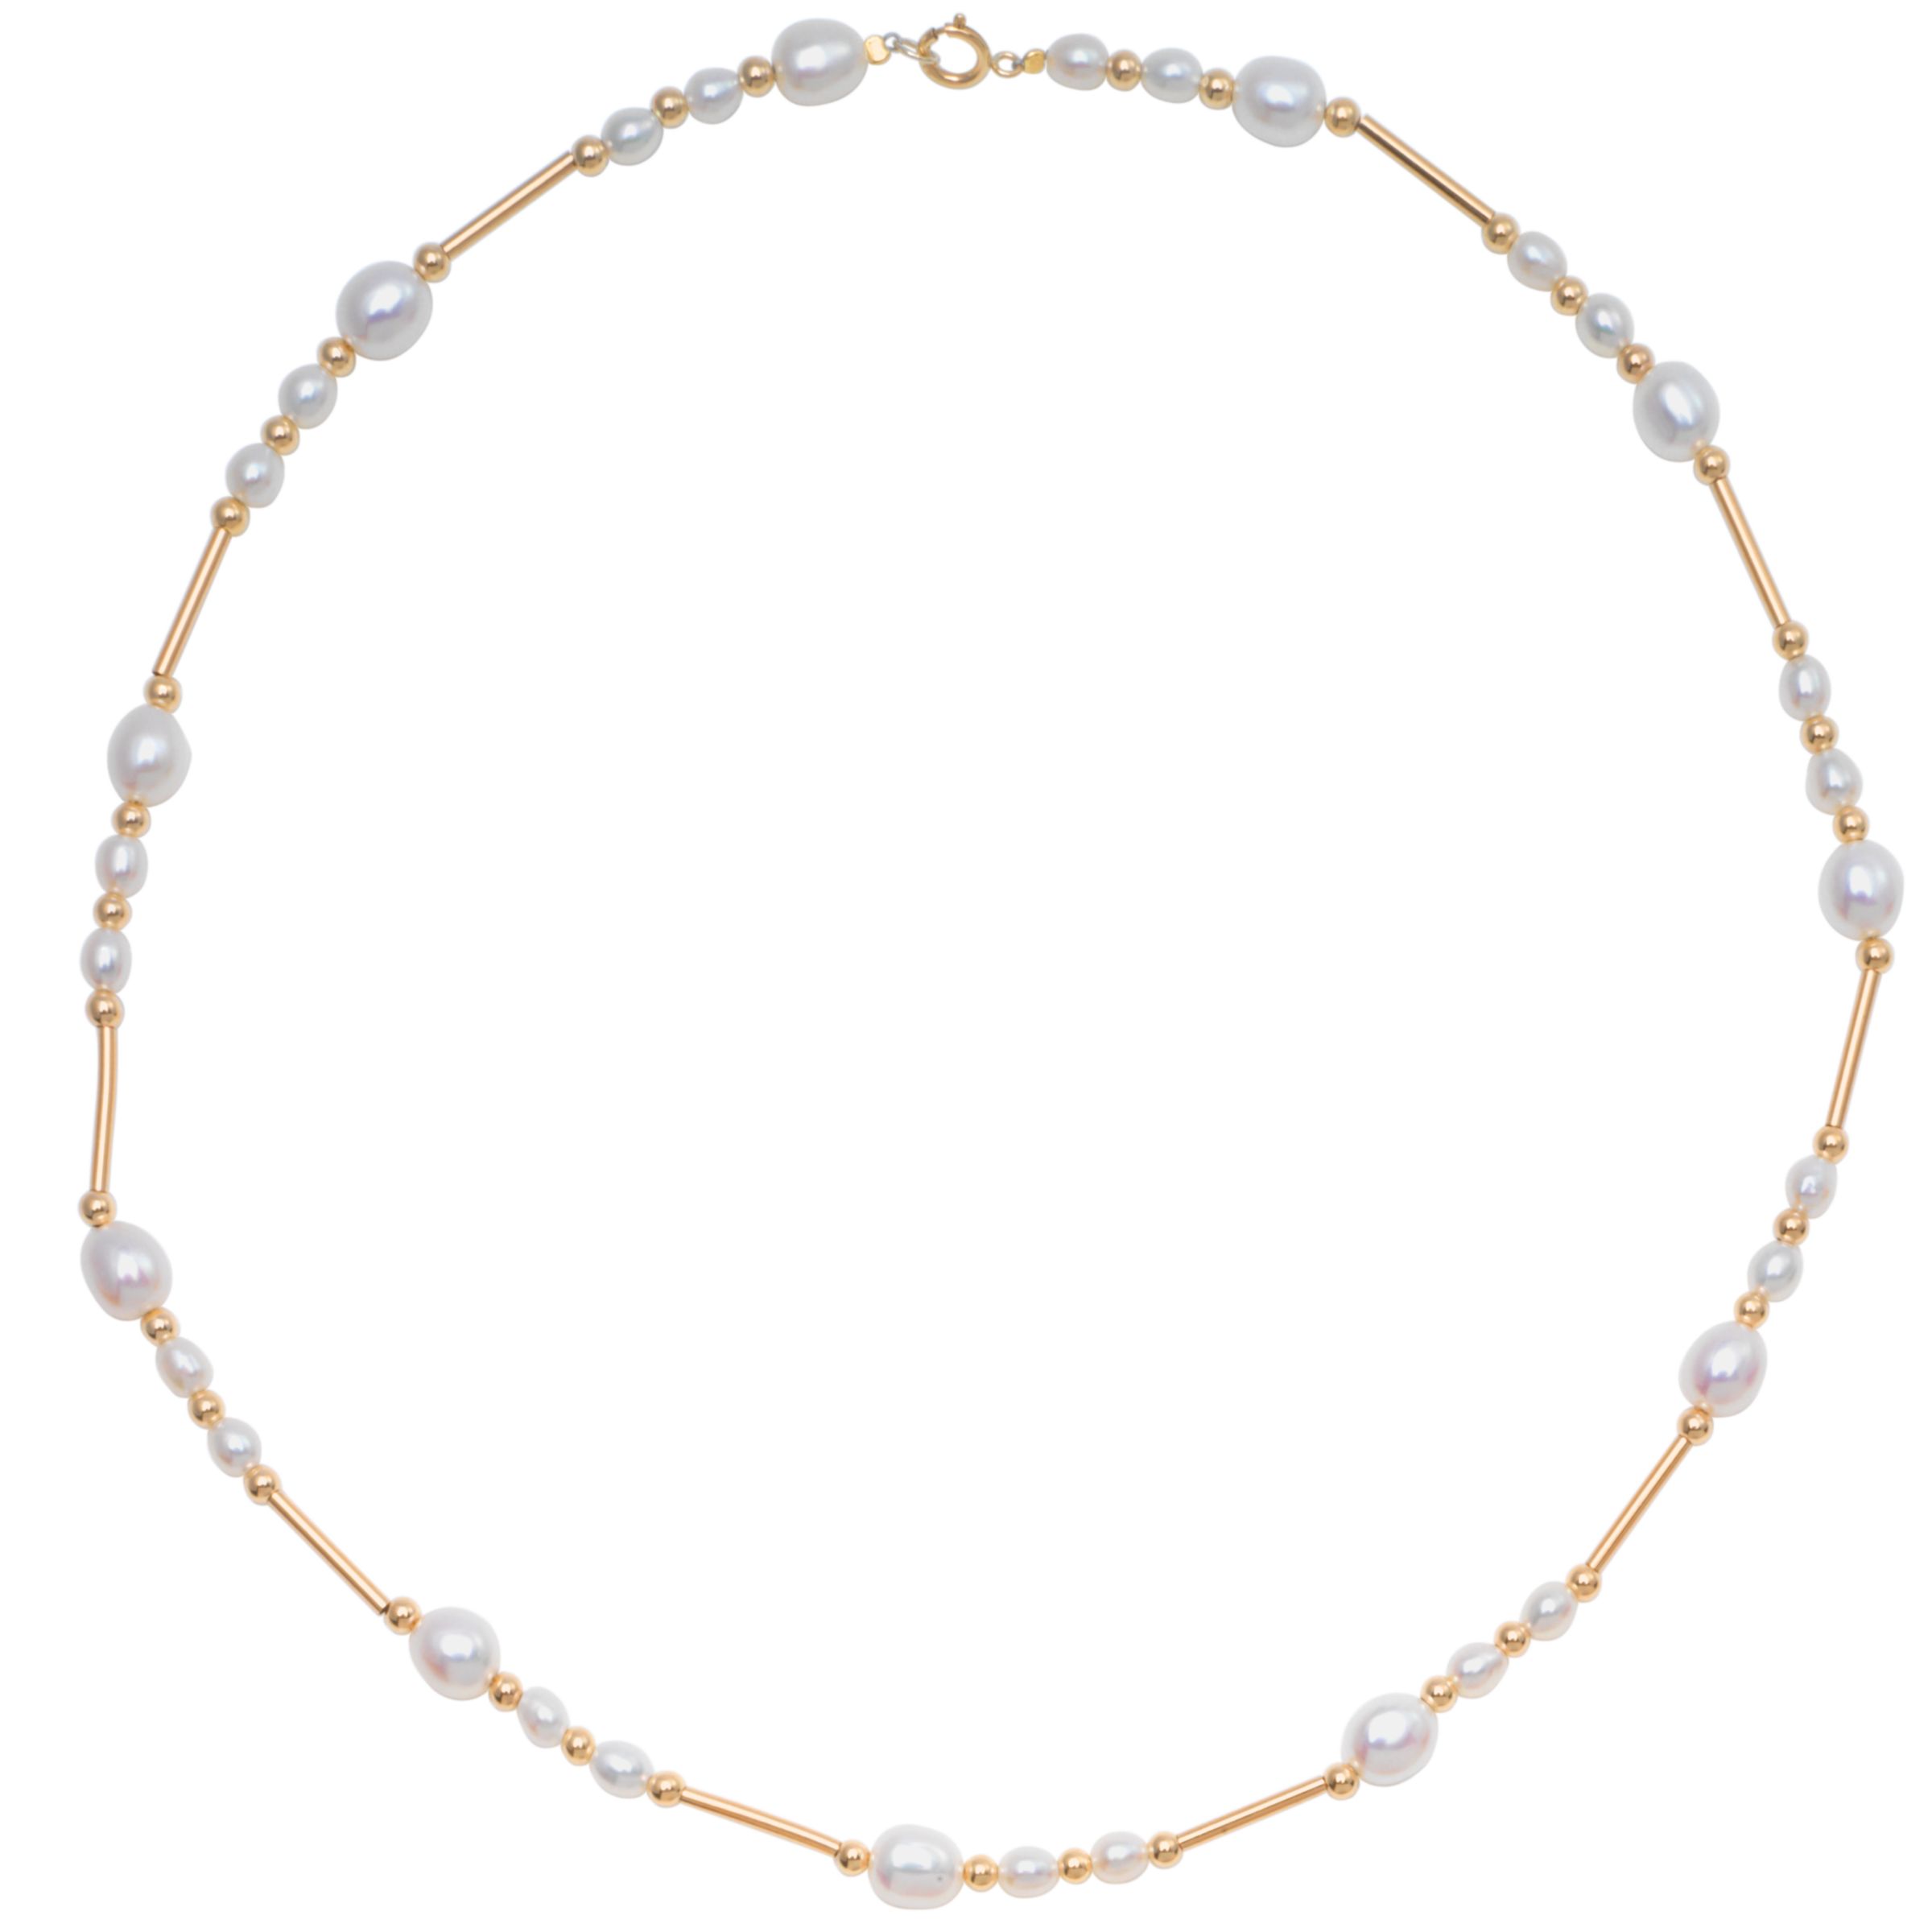 Freshwater White Pearls and Gold Bead 18" Necklace at JohnLewis